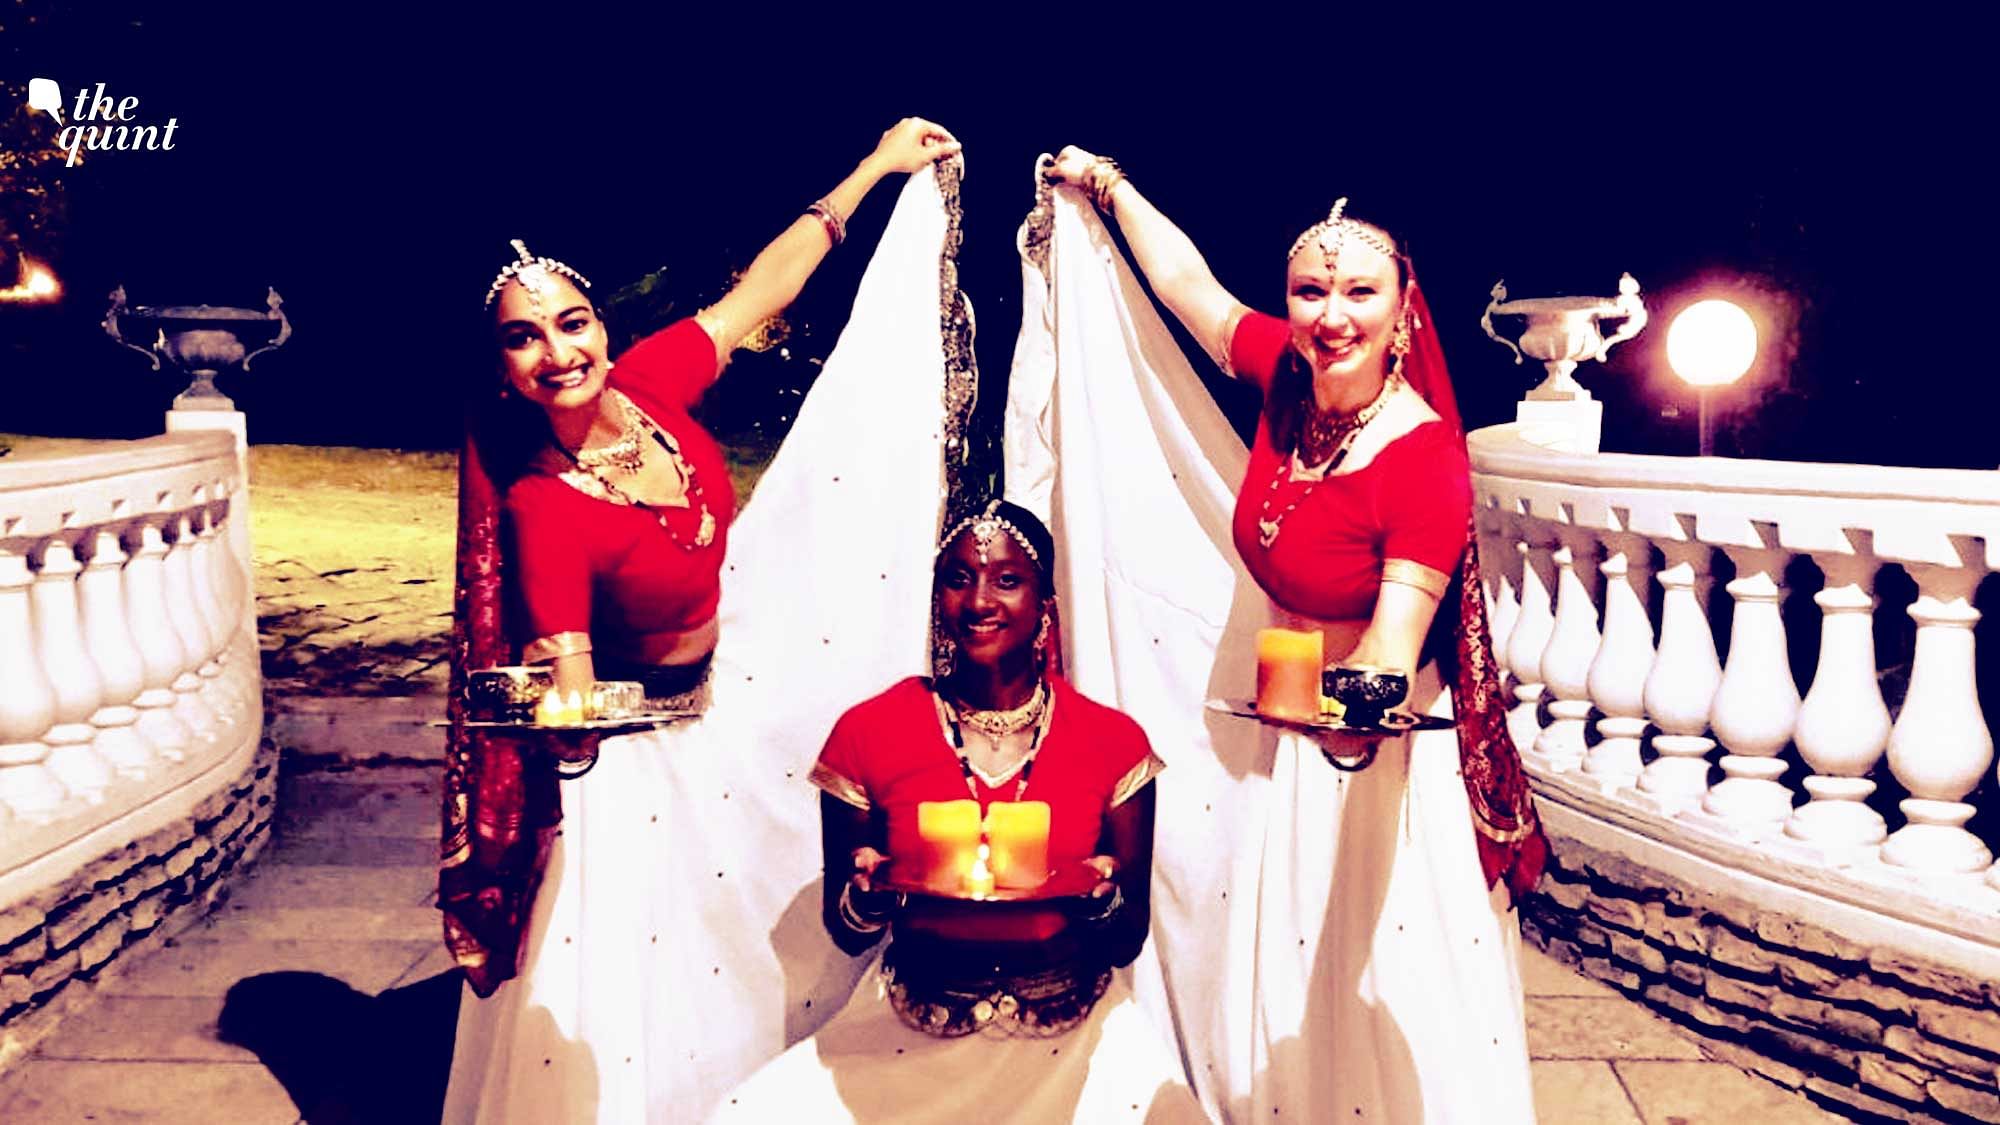 Image of author of the article Kavya Iyer (L) with two other international dancers in France – representing multiculturalism – used for representational purposes.